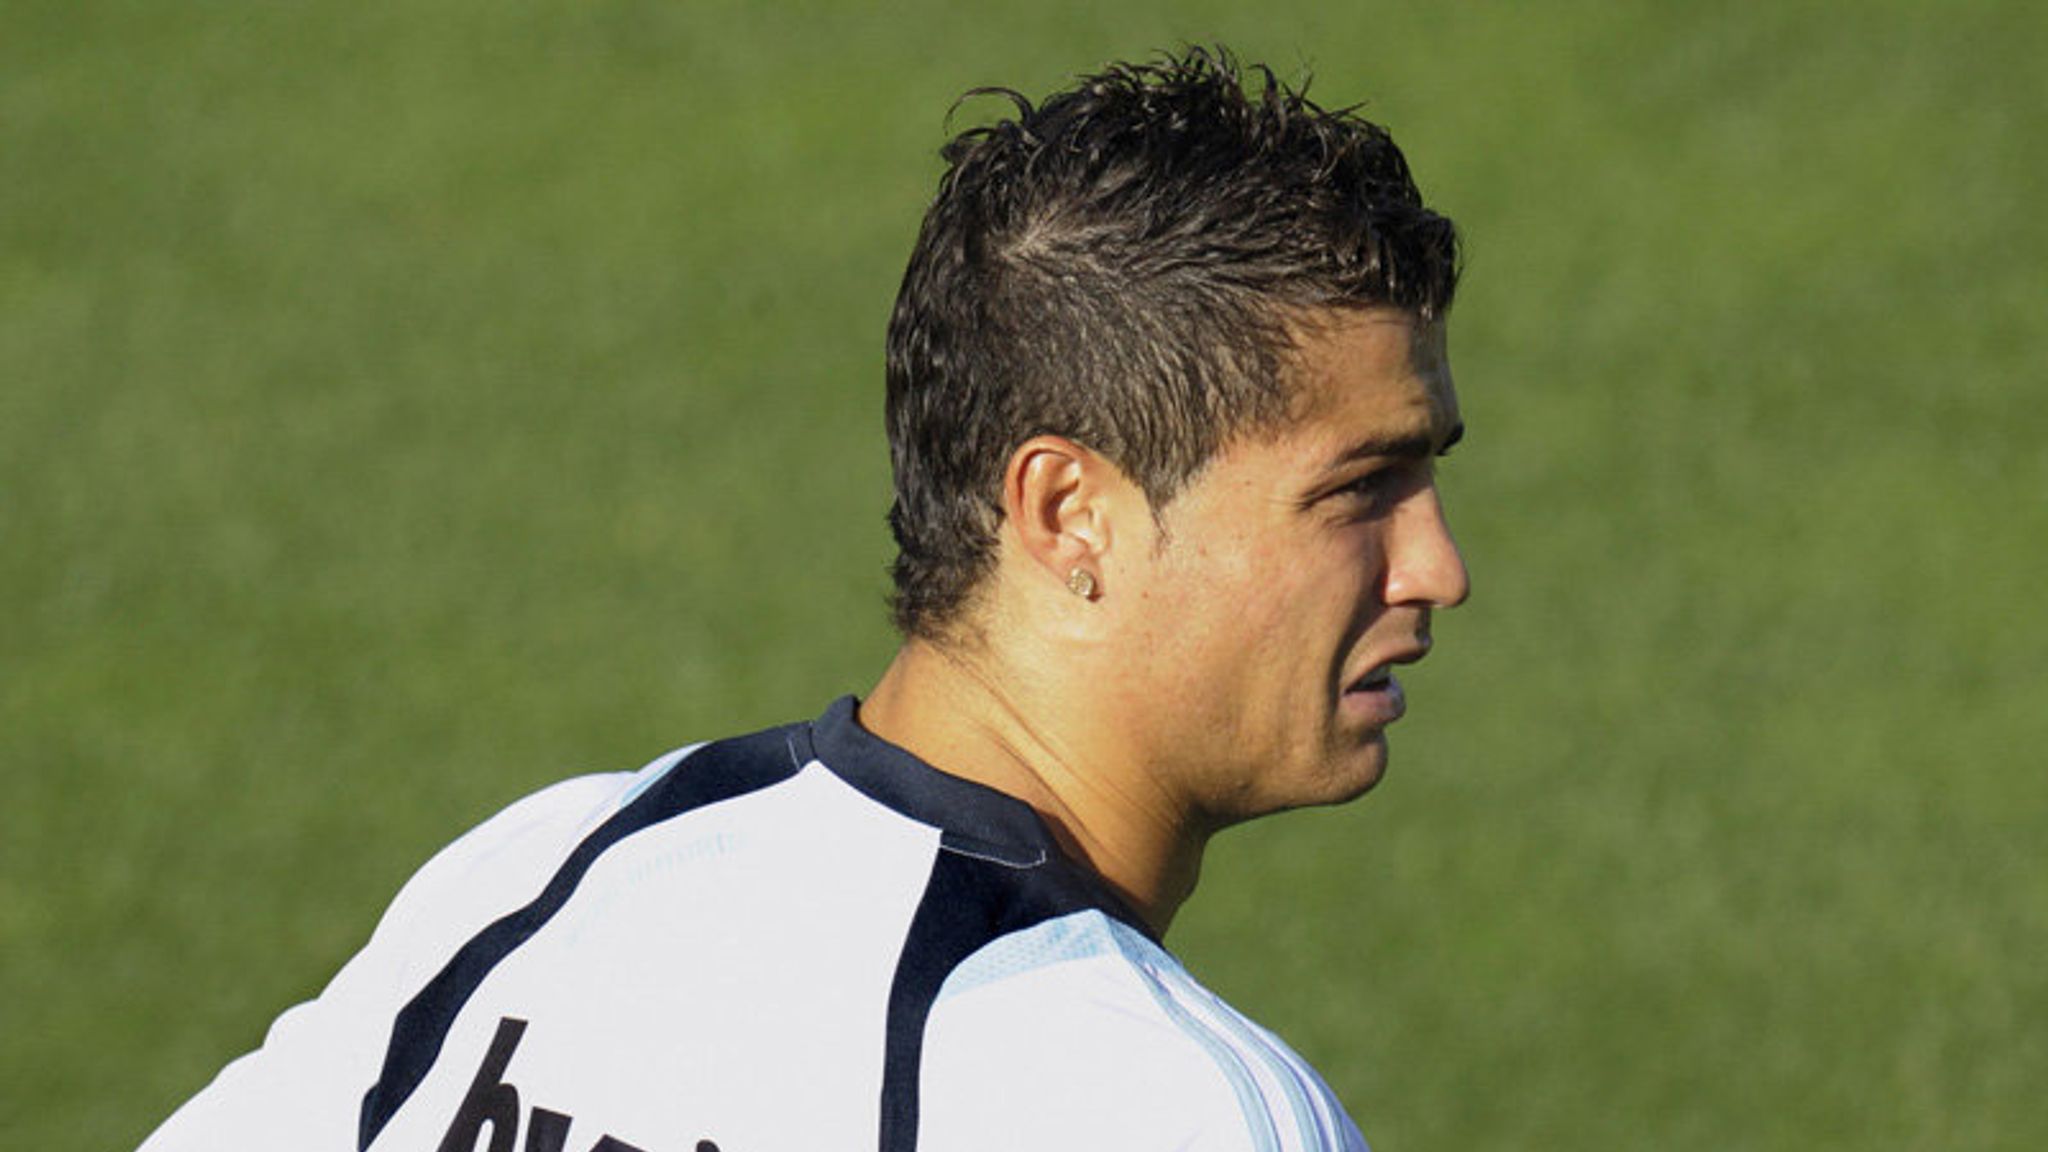 Cristiano Ronaldo of Real Madrid scratches his head during the